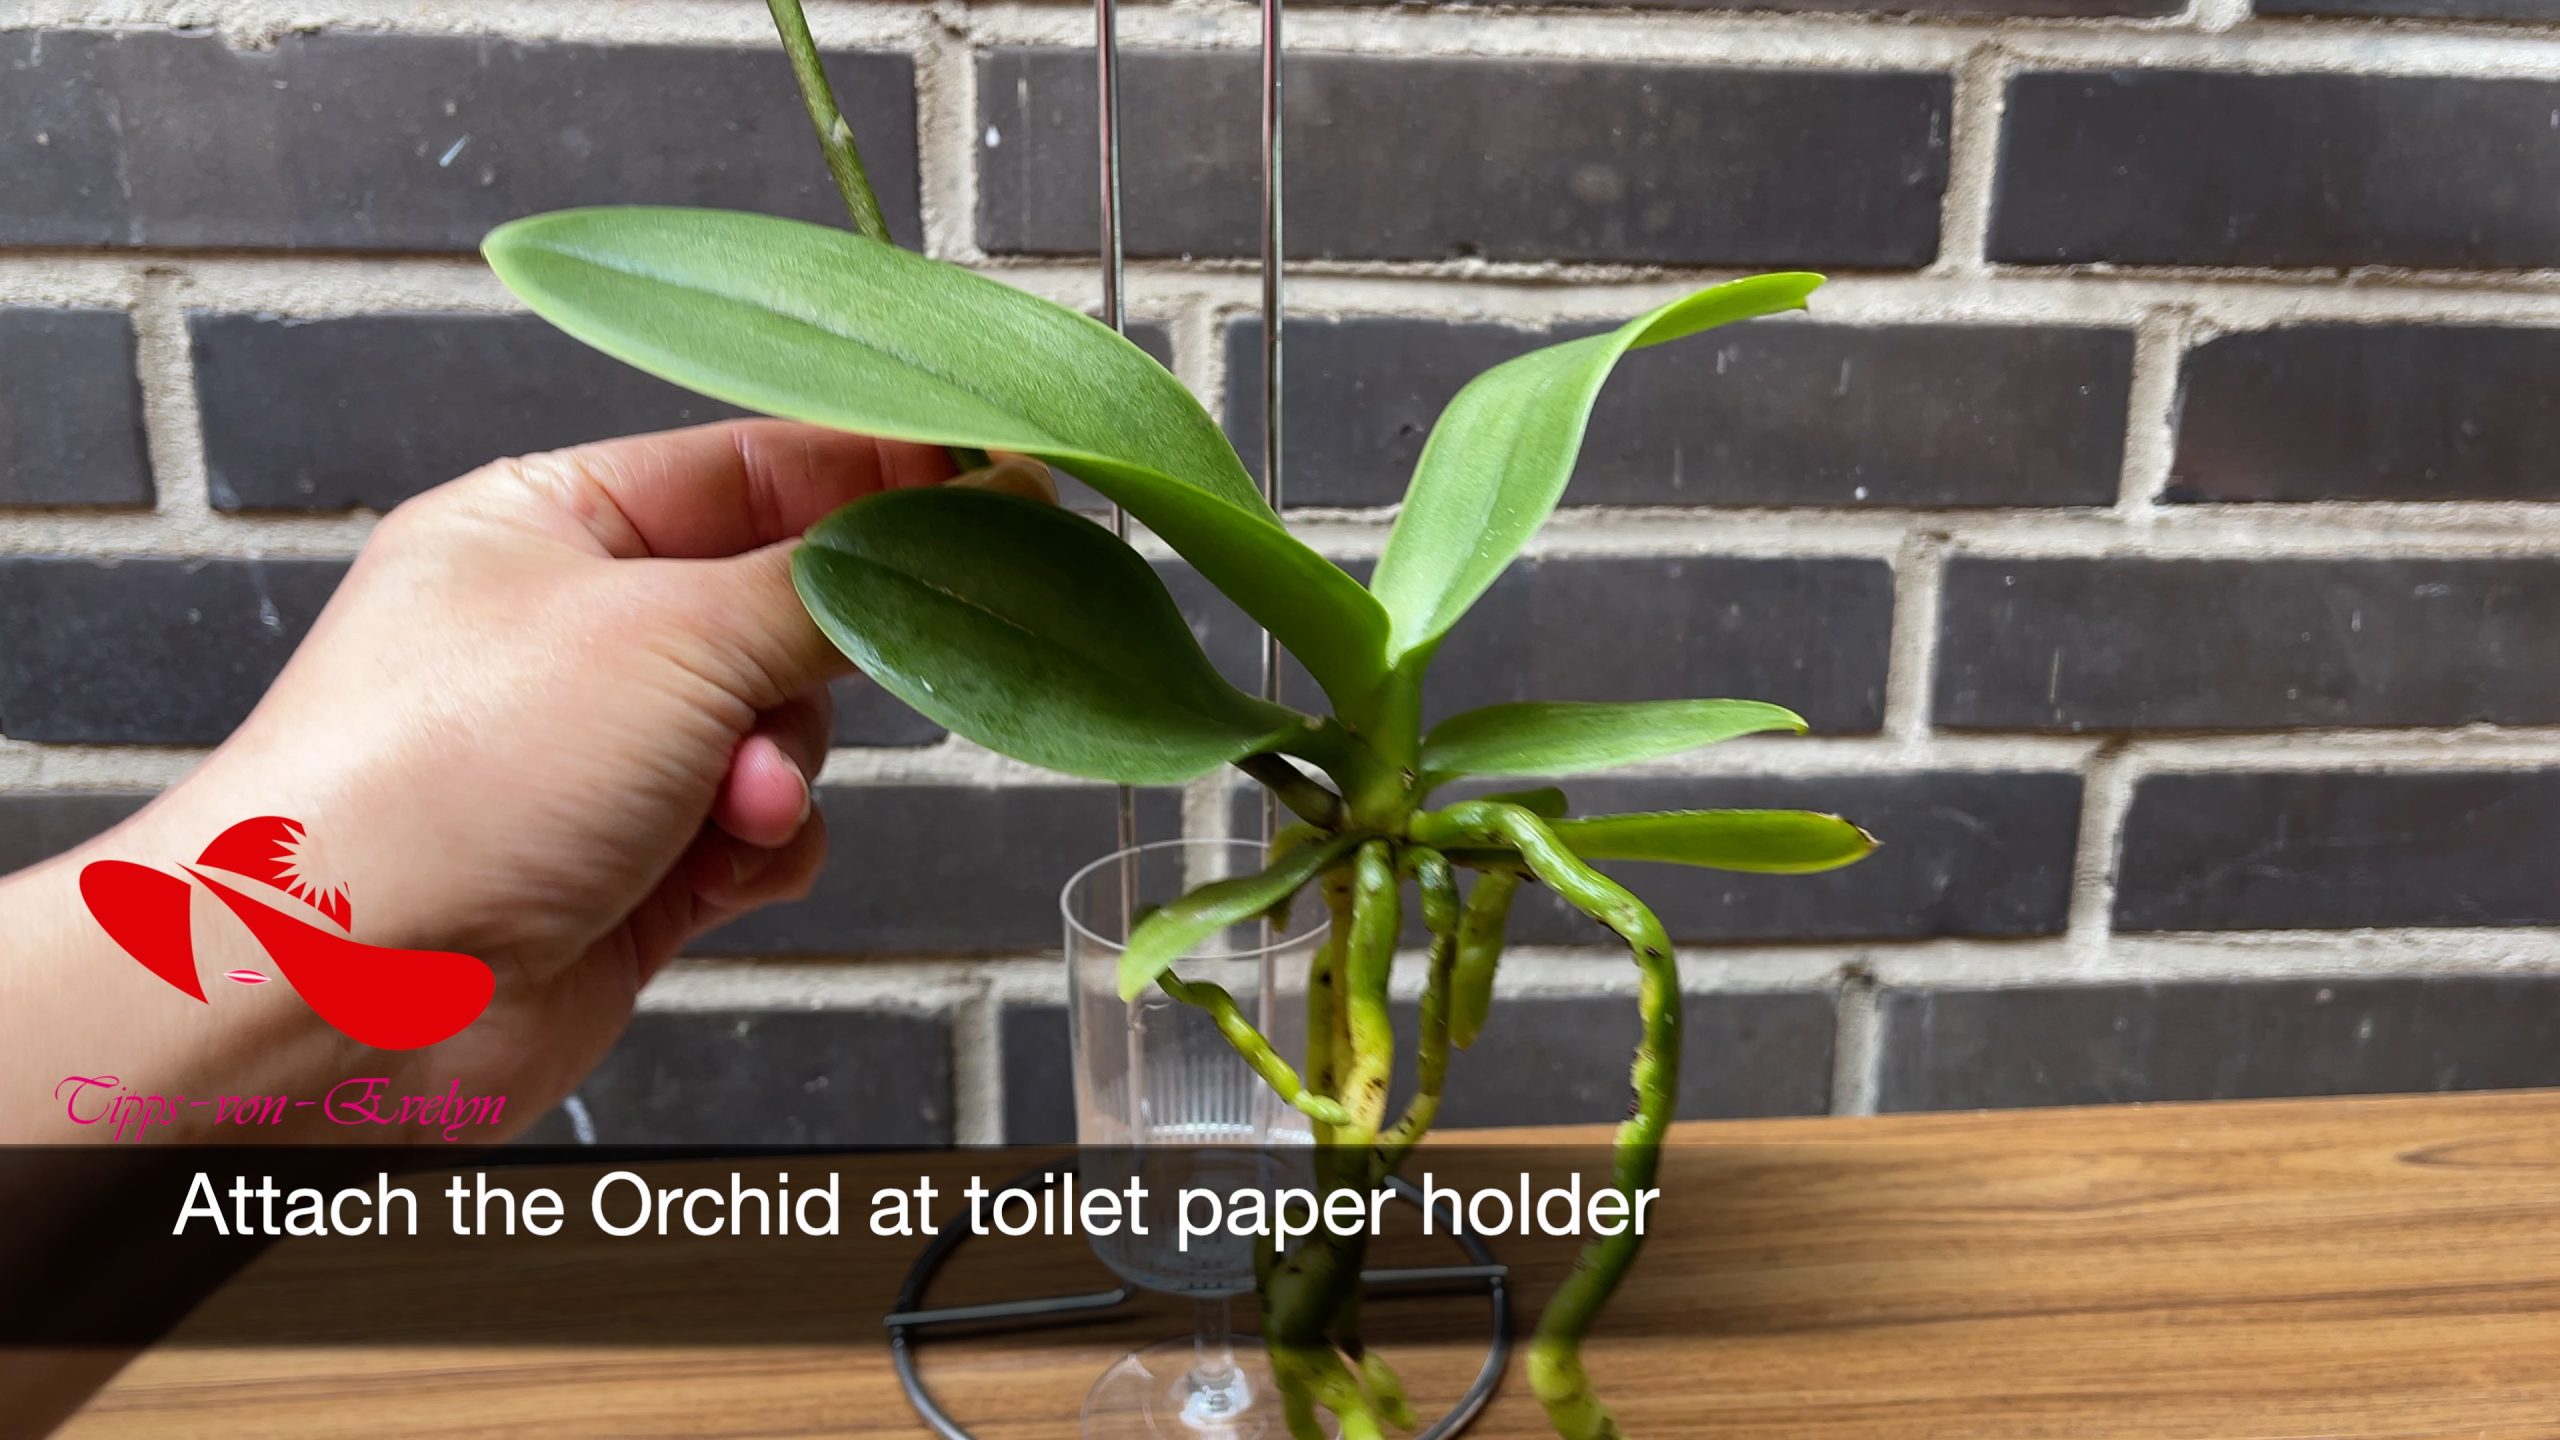 how to grow orchids, orchids growing, Orchid care, orchid new spike care, how to look after orchids, orchid care for beginners, orchid losing flowers, water culture orchids, hydroponic orchids, orchid cutting, double spike orchid, orchid growing roots in the air, unhealthy orchid roots, pruning orchids, do you trim orchid stems, when do orchids bloom indoors, orchids care, orchid care sunlight, orchid root care, 